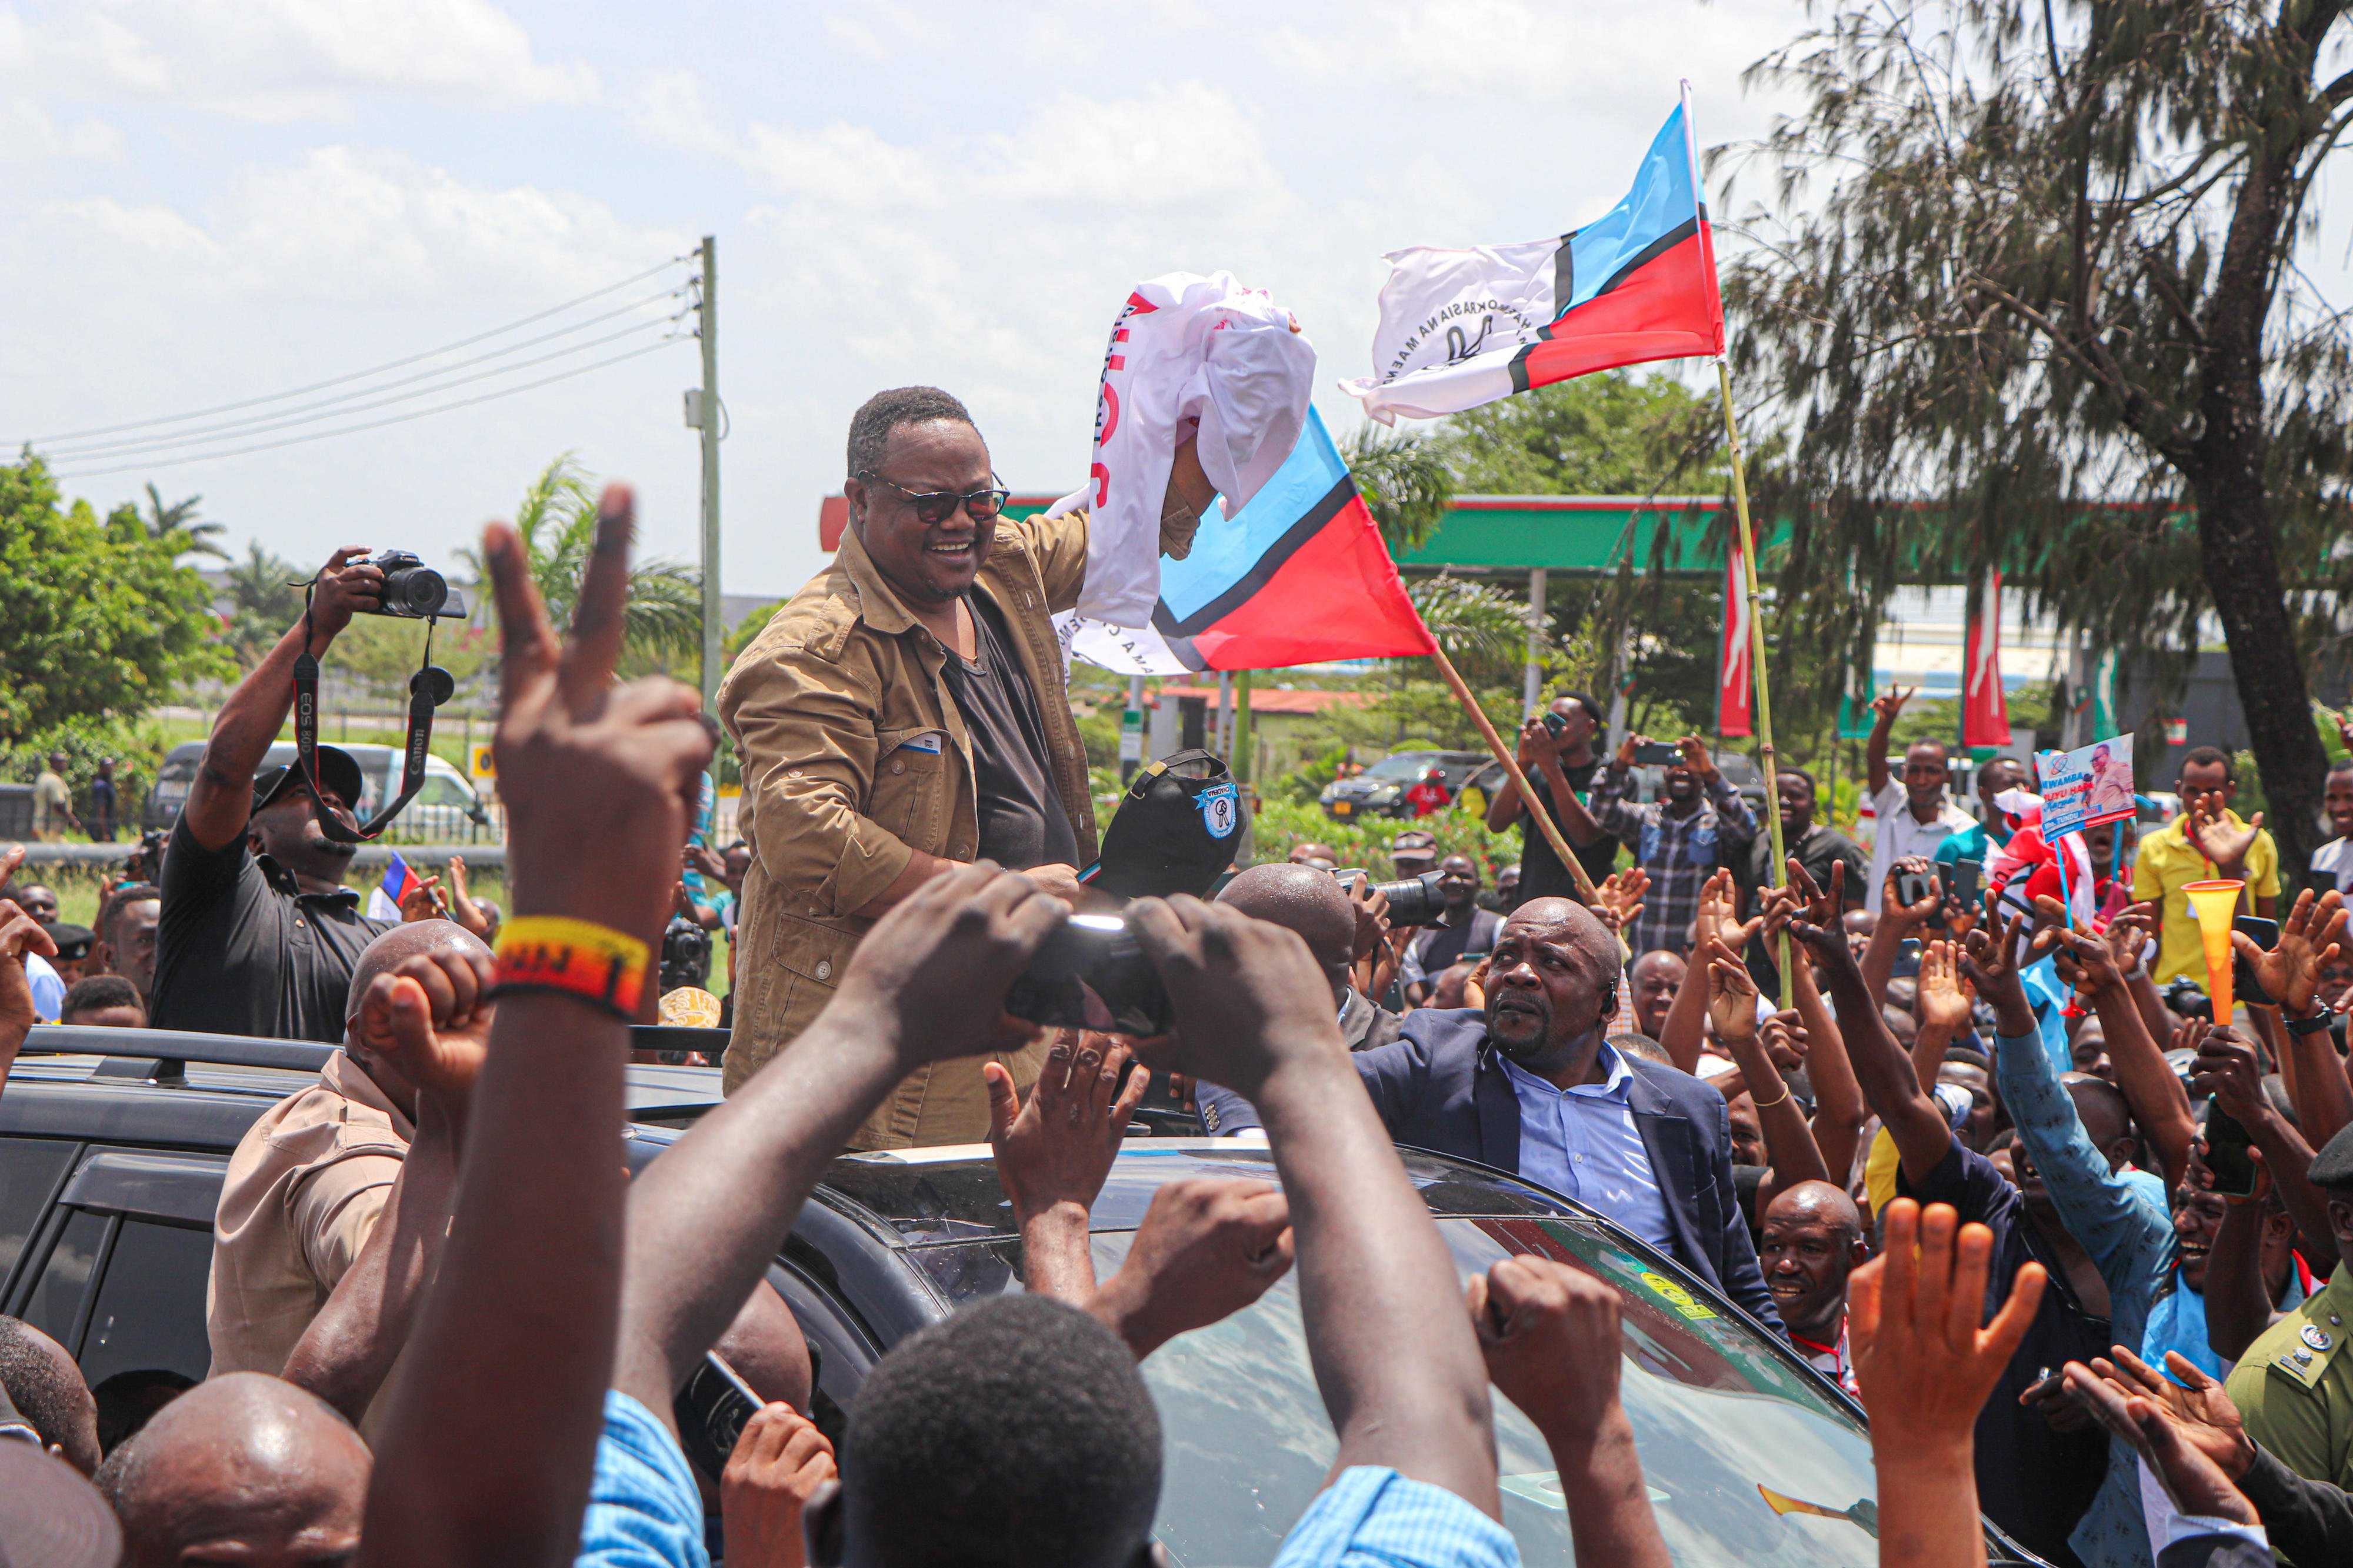 Lissu is back as are opposition rallies; let the (fair) games begin